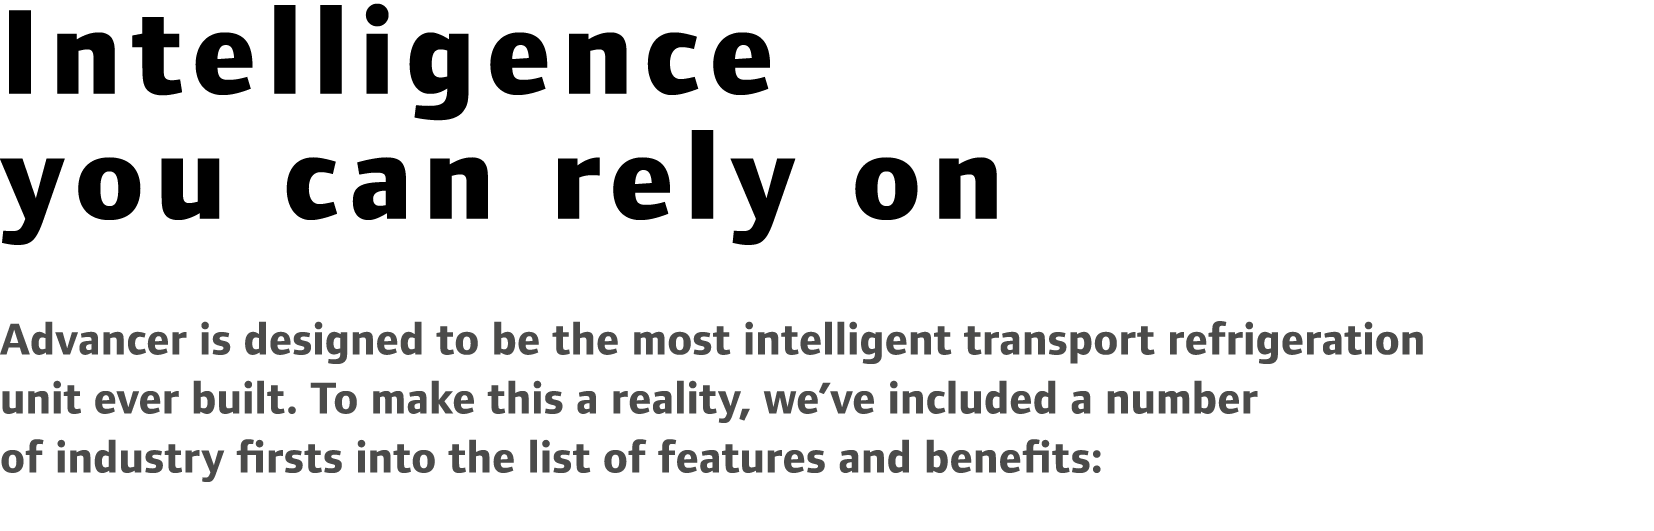 Intelligence you can rely on Advancer is designed to be the most intelligent transport refrigeration unit ever built....